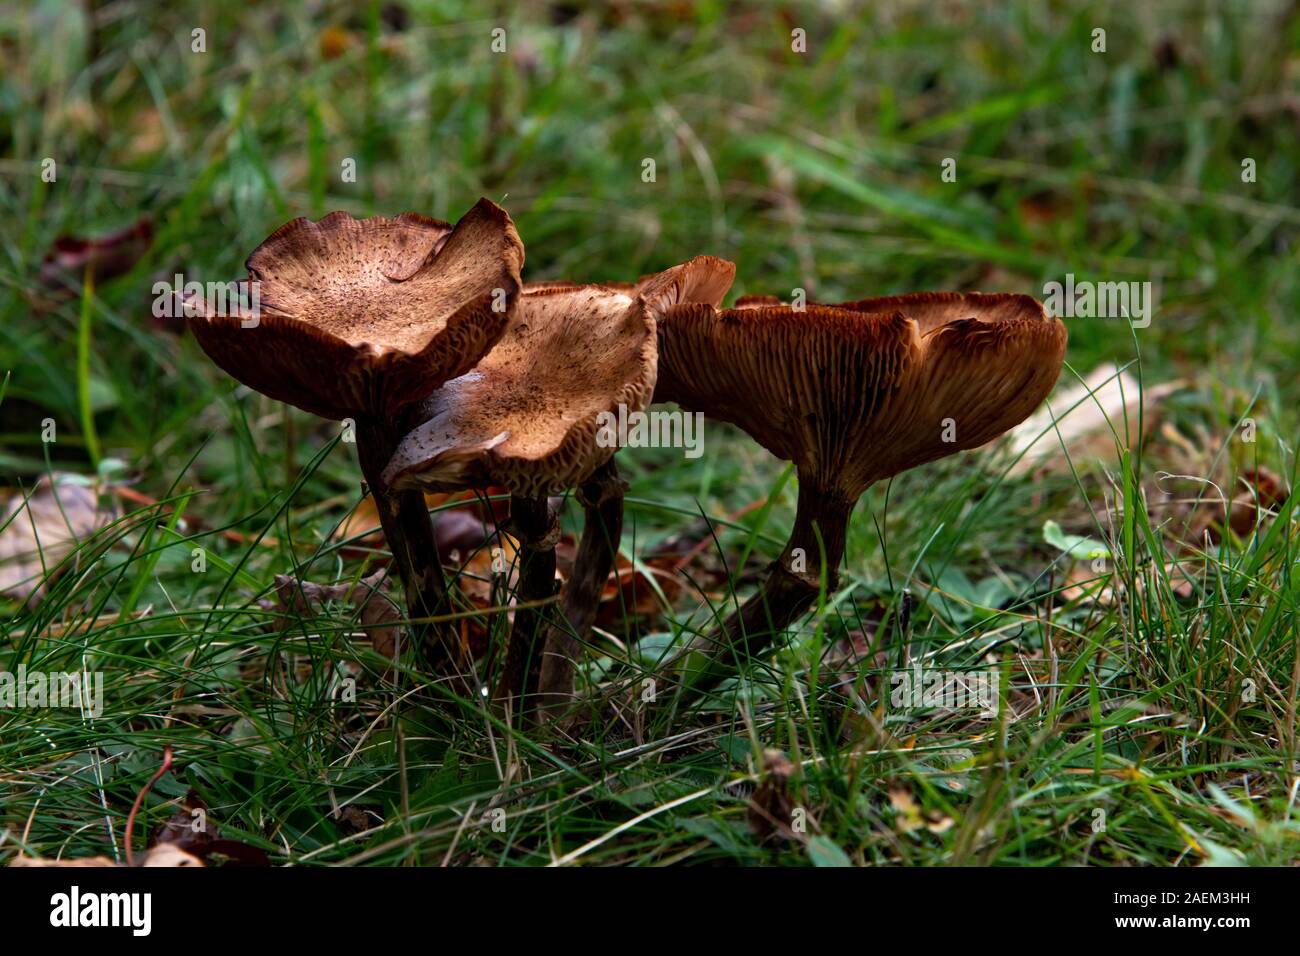 Cluster of Mushrooms in a Forest Stock Photo